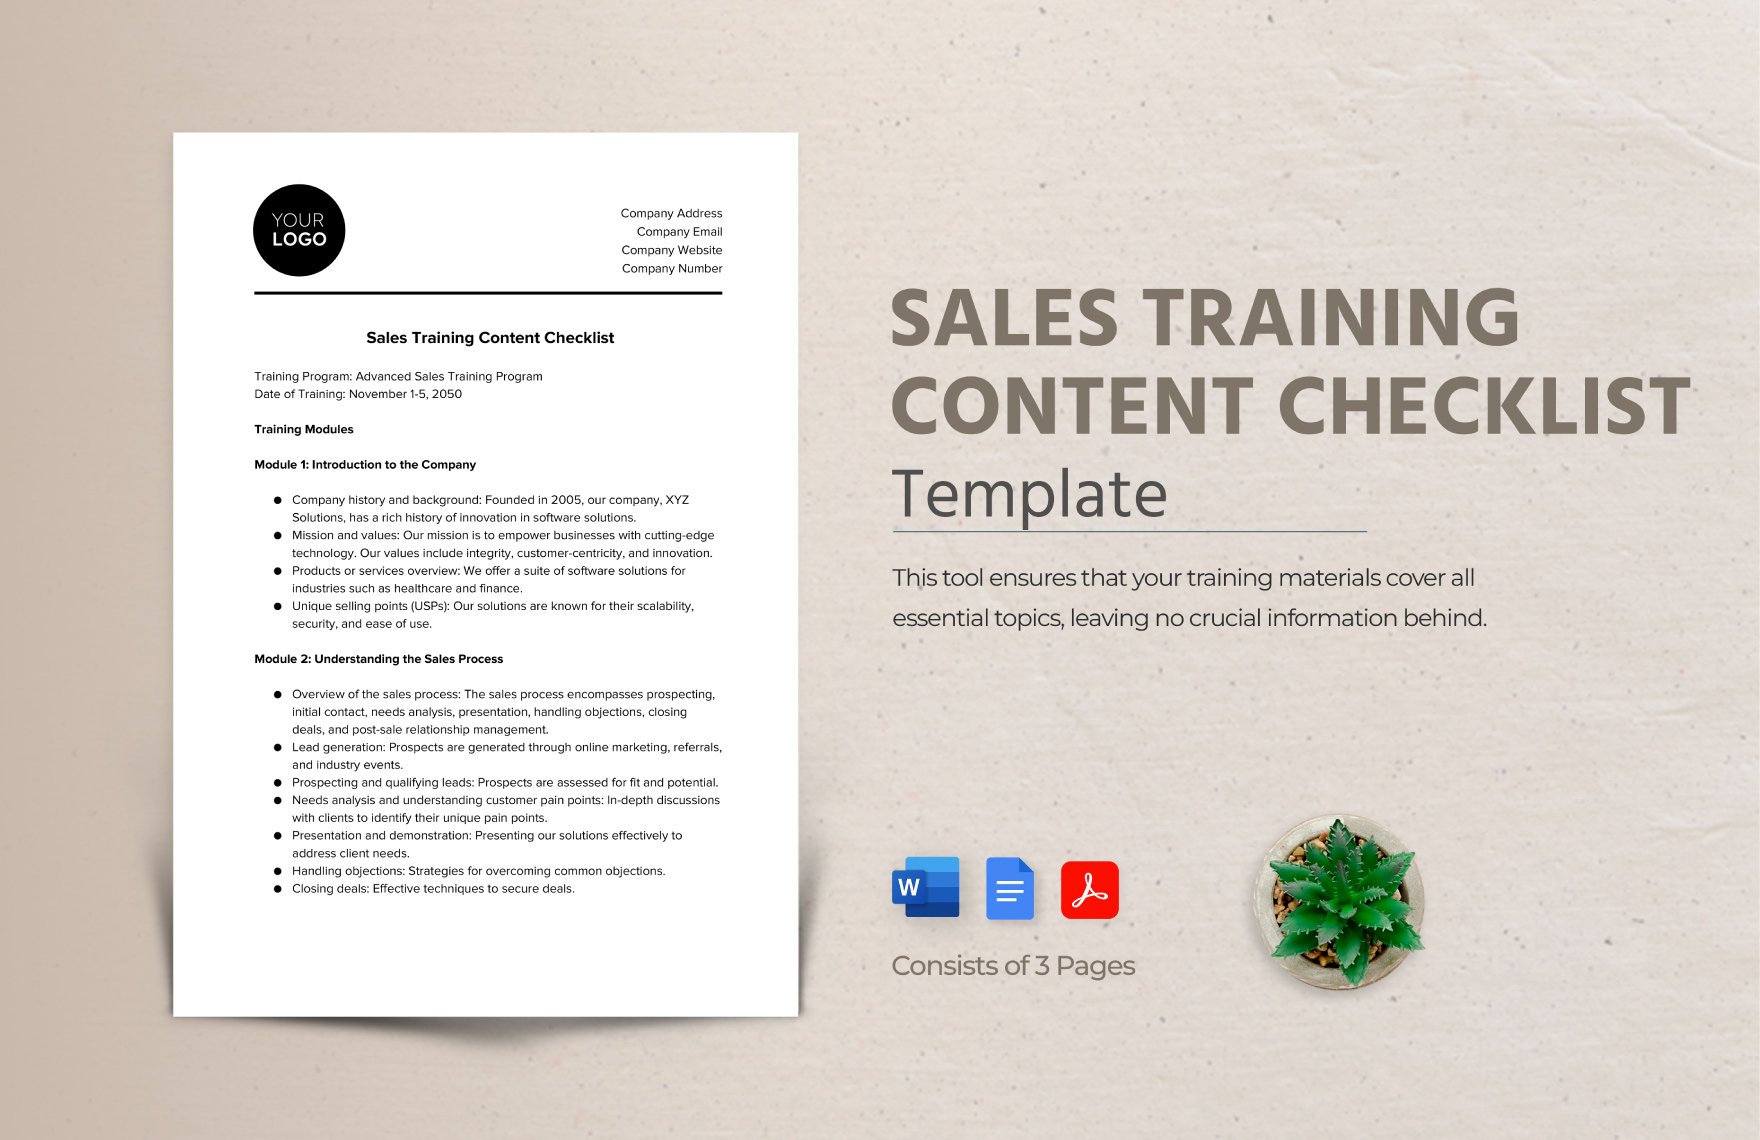 Sales Training Content Checklist Template in Word, Google Docs, PDF